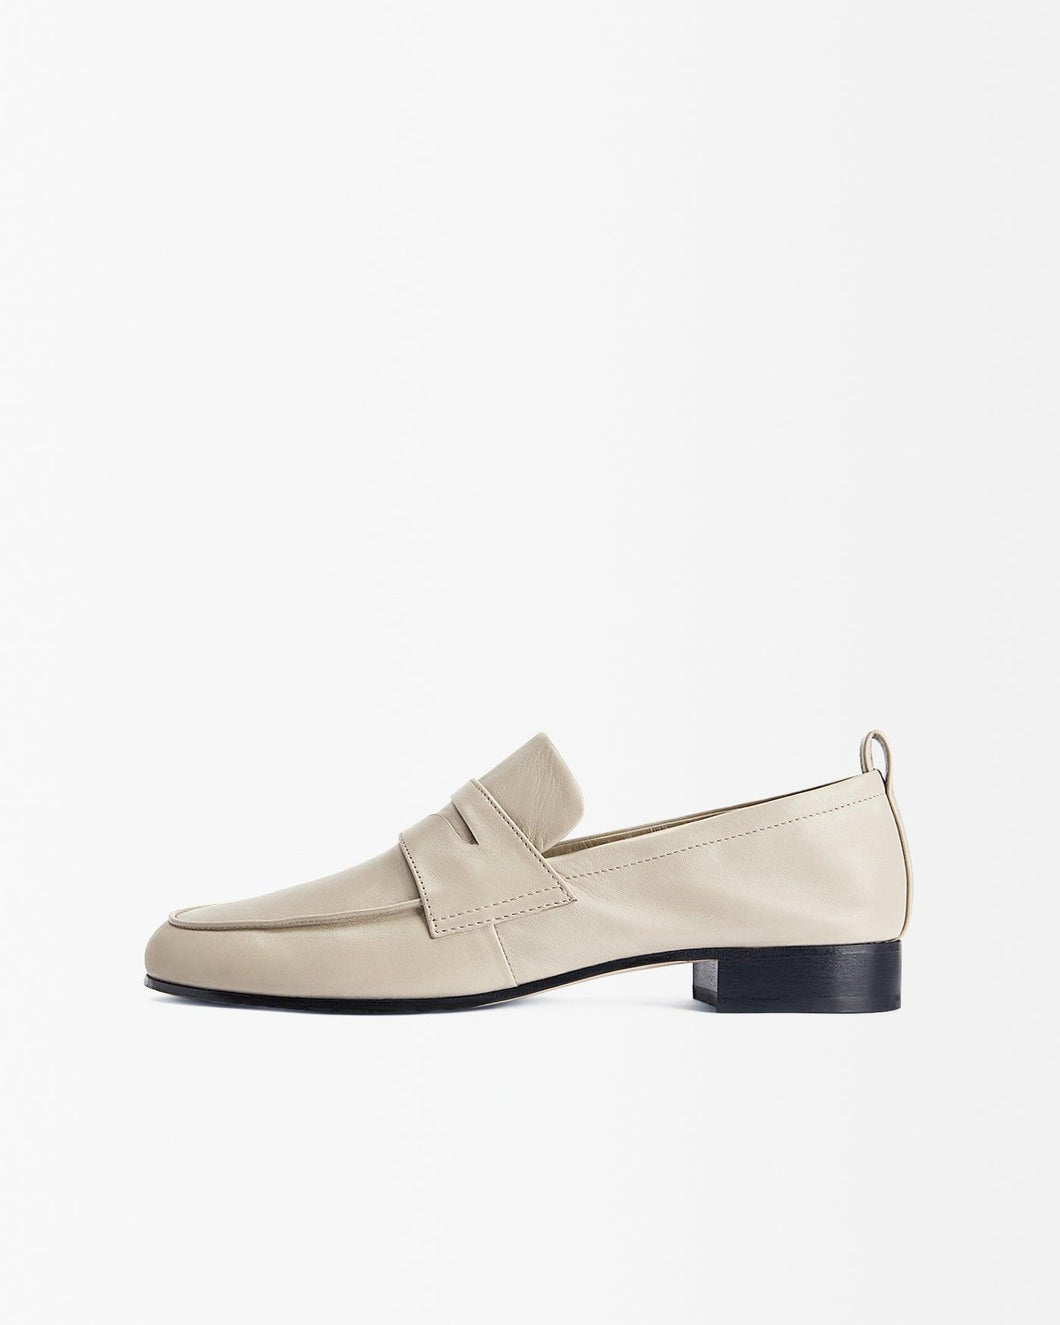 Side view of Yuni Buffa Fez Penny Loafer shoe in Ecru white color made in Italy with Italian Lamb Nappa leather